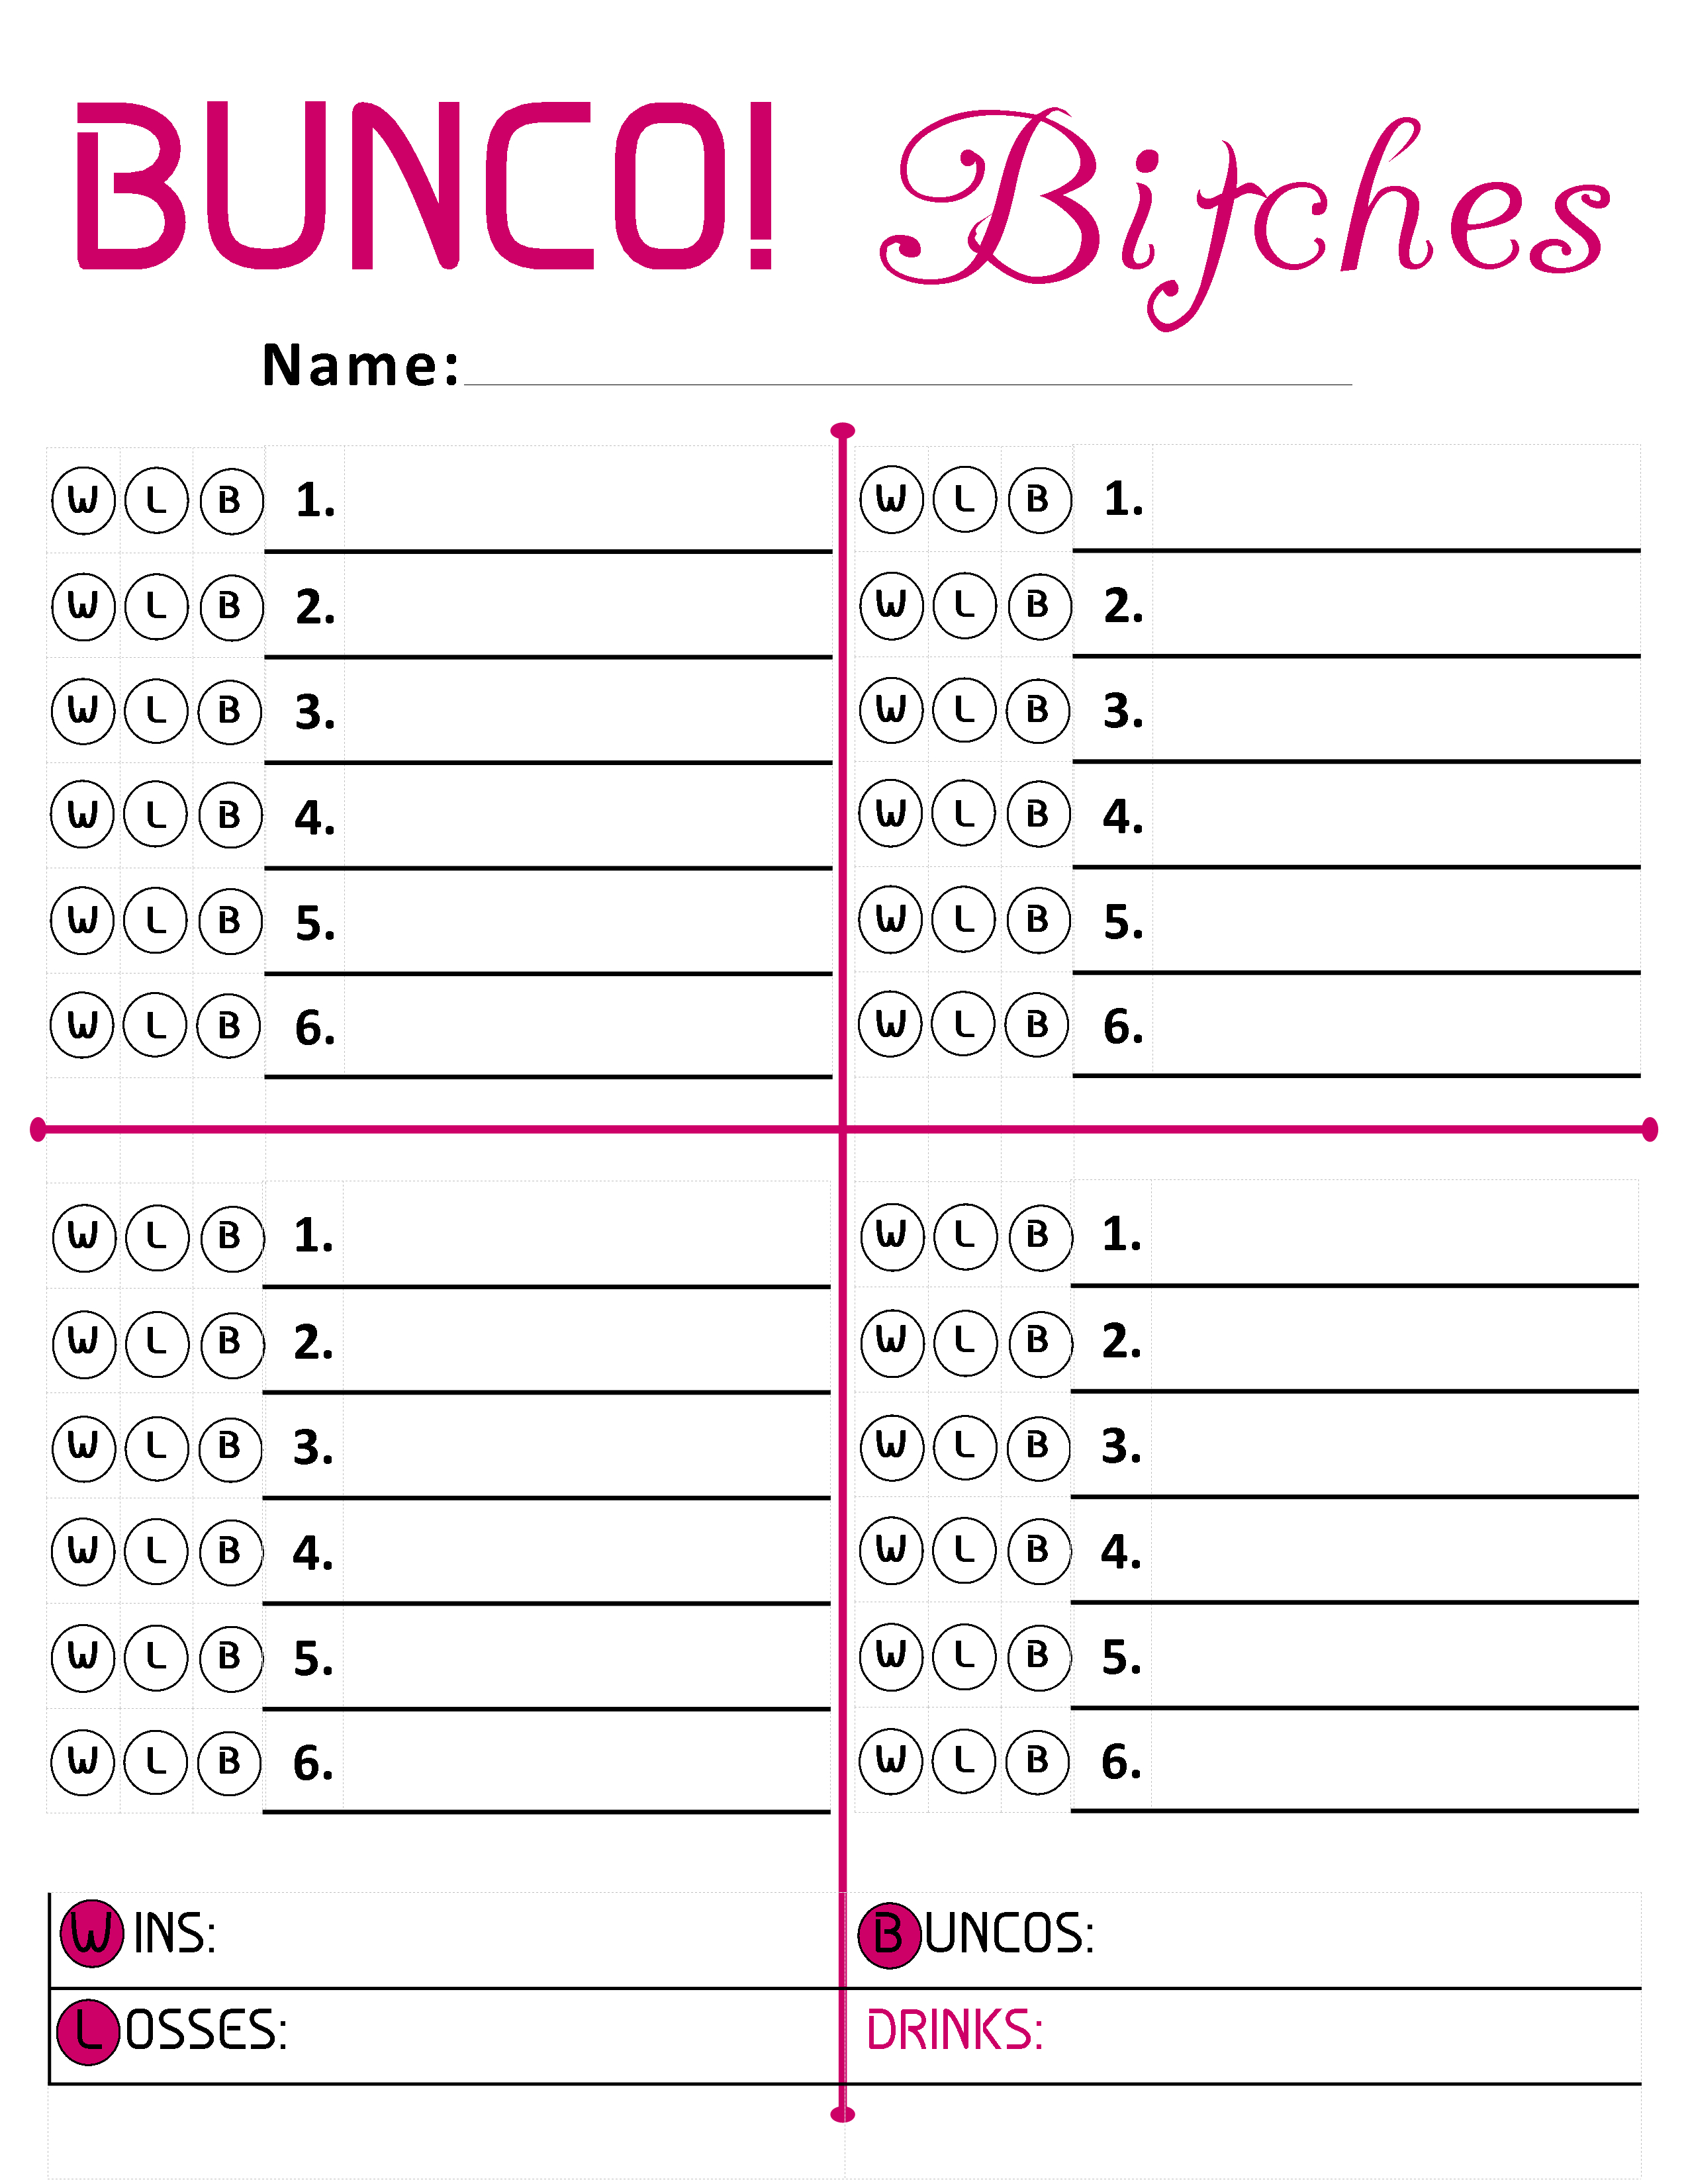 Pinfay T On Bunco And Games In 2019 | Pinterest | Bunco Score - Free Printable Bunco Score Sheets